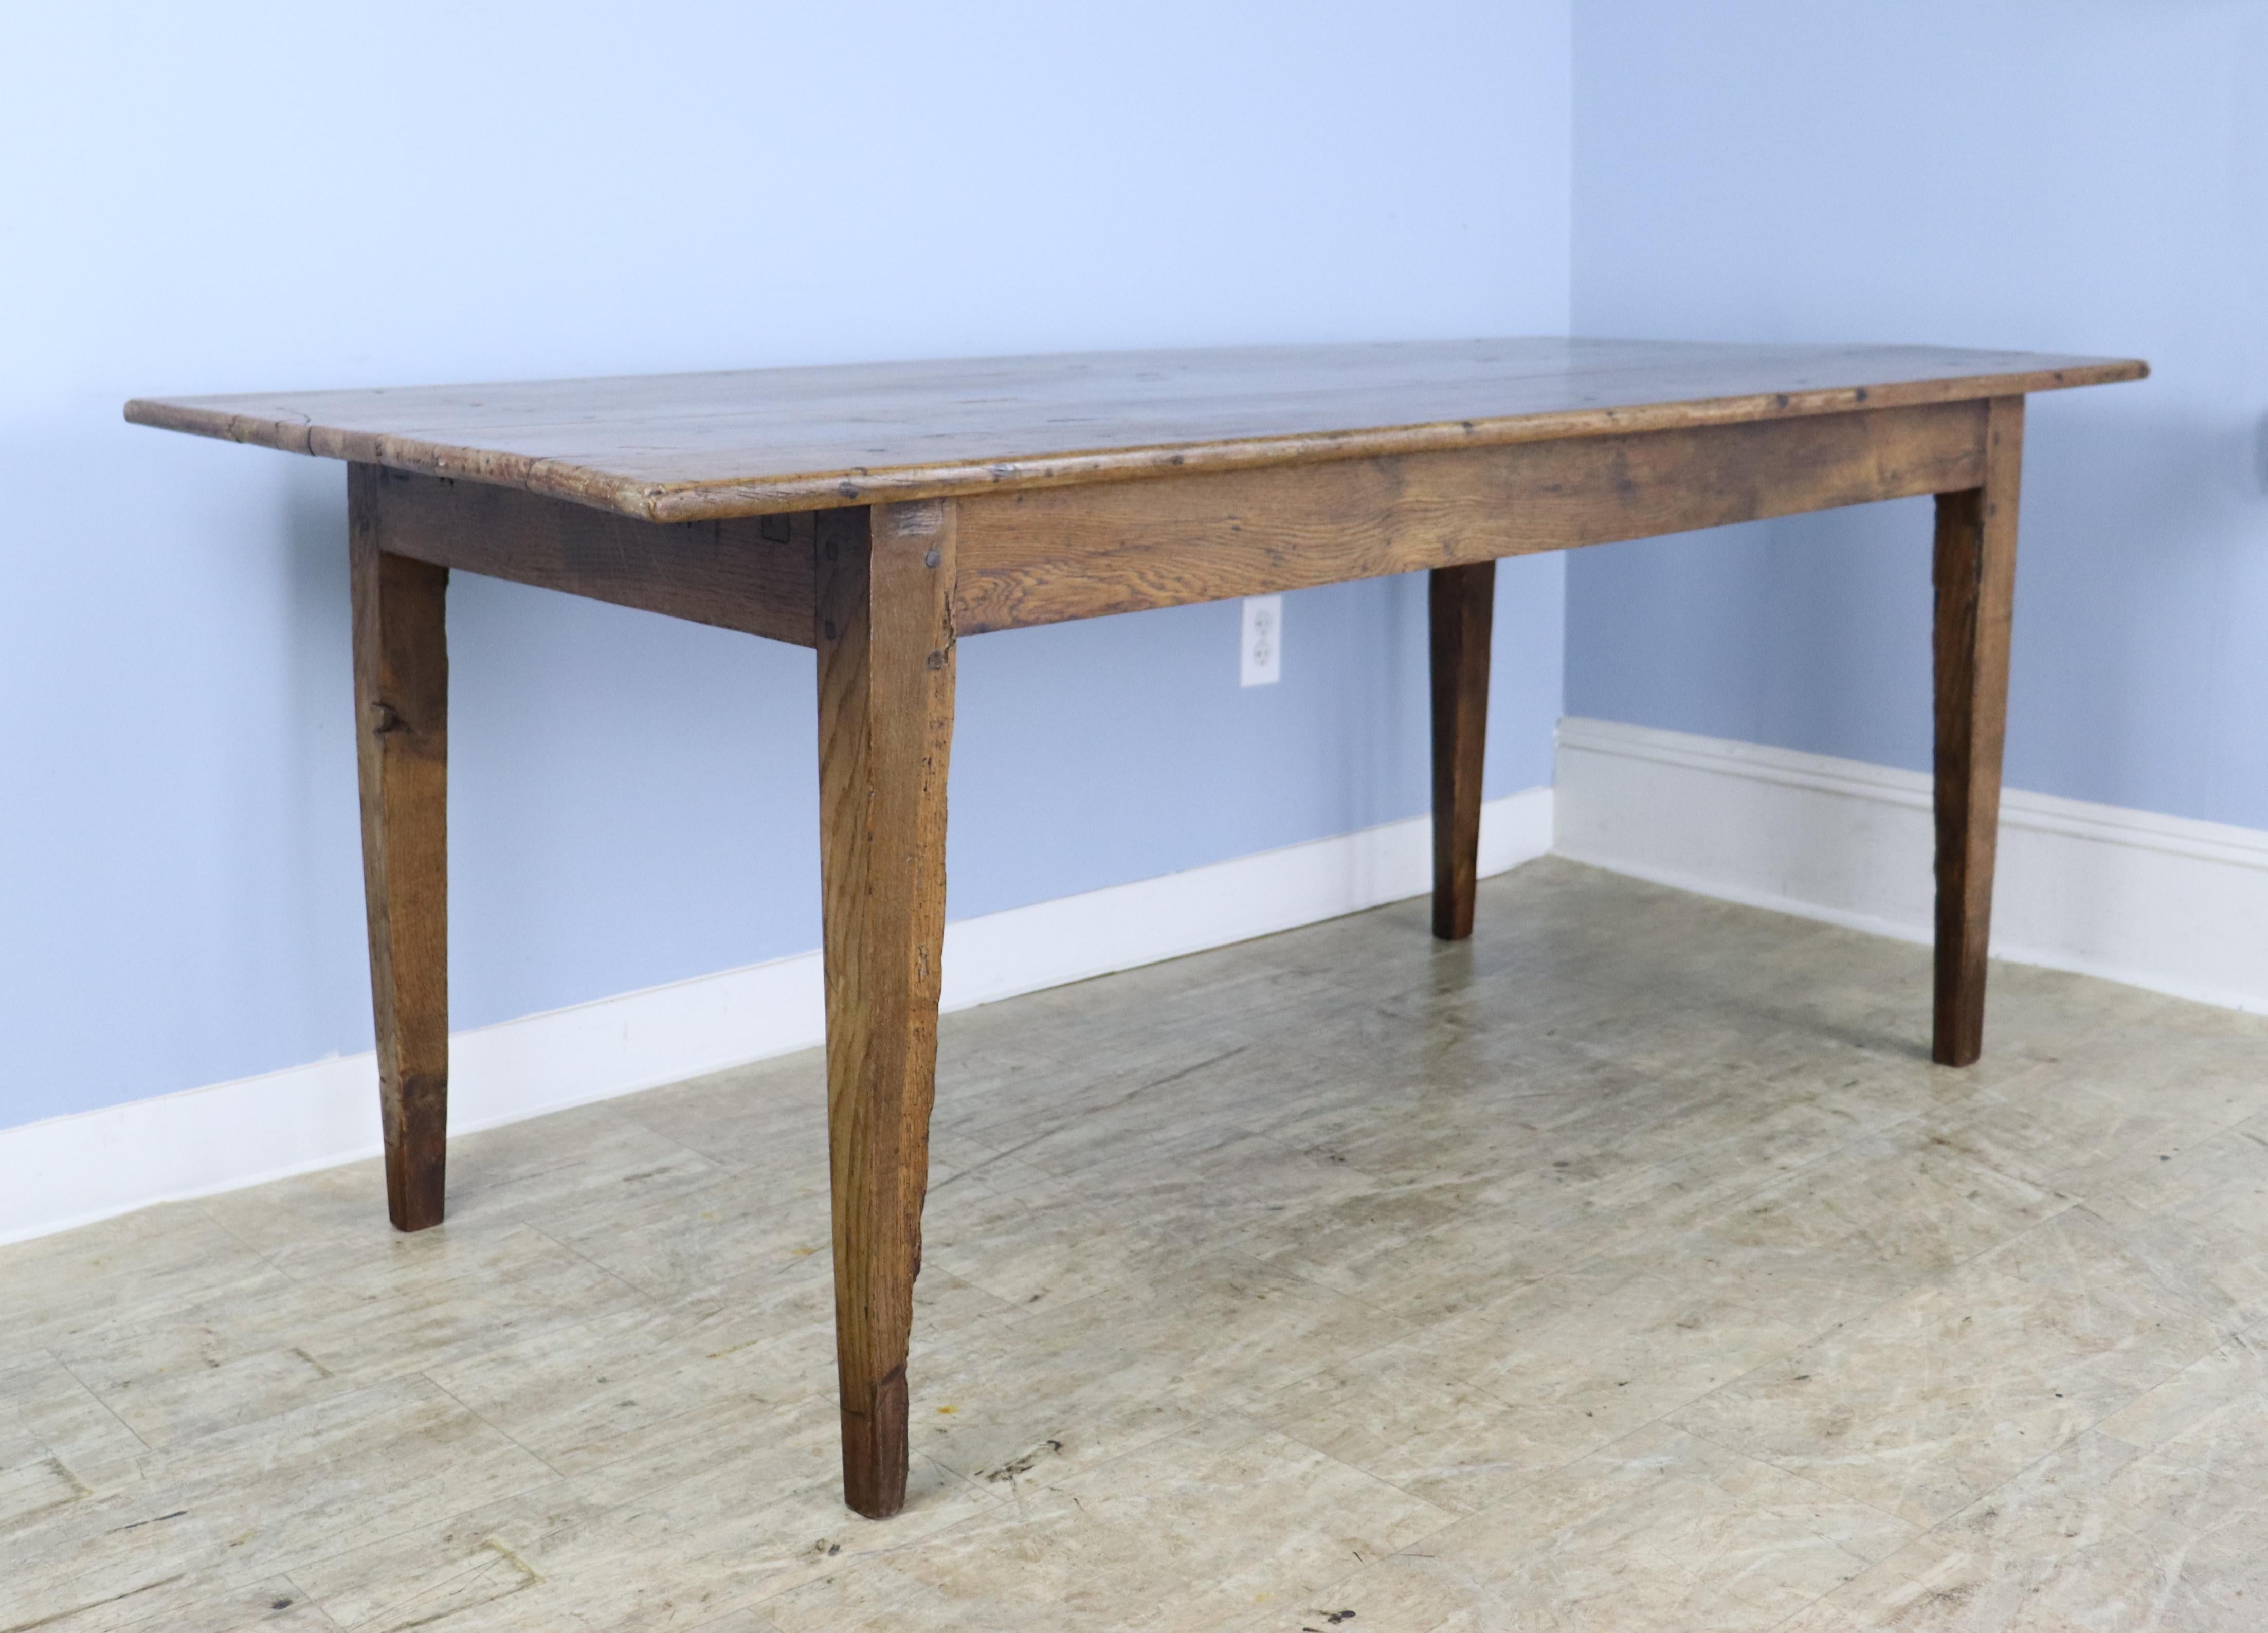 A good country cherry farm table with an oak base.  Classic tapered legs, pegged nicely at the apron. The top has a warm glowing patina with attractive grain and some very interesting old wear. The apron height of 24.75 inches is good for knees and